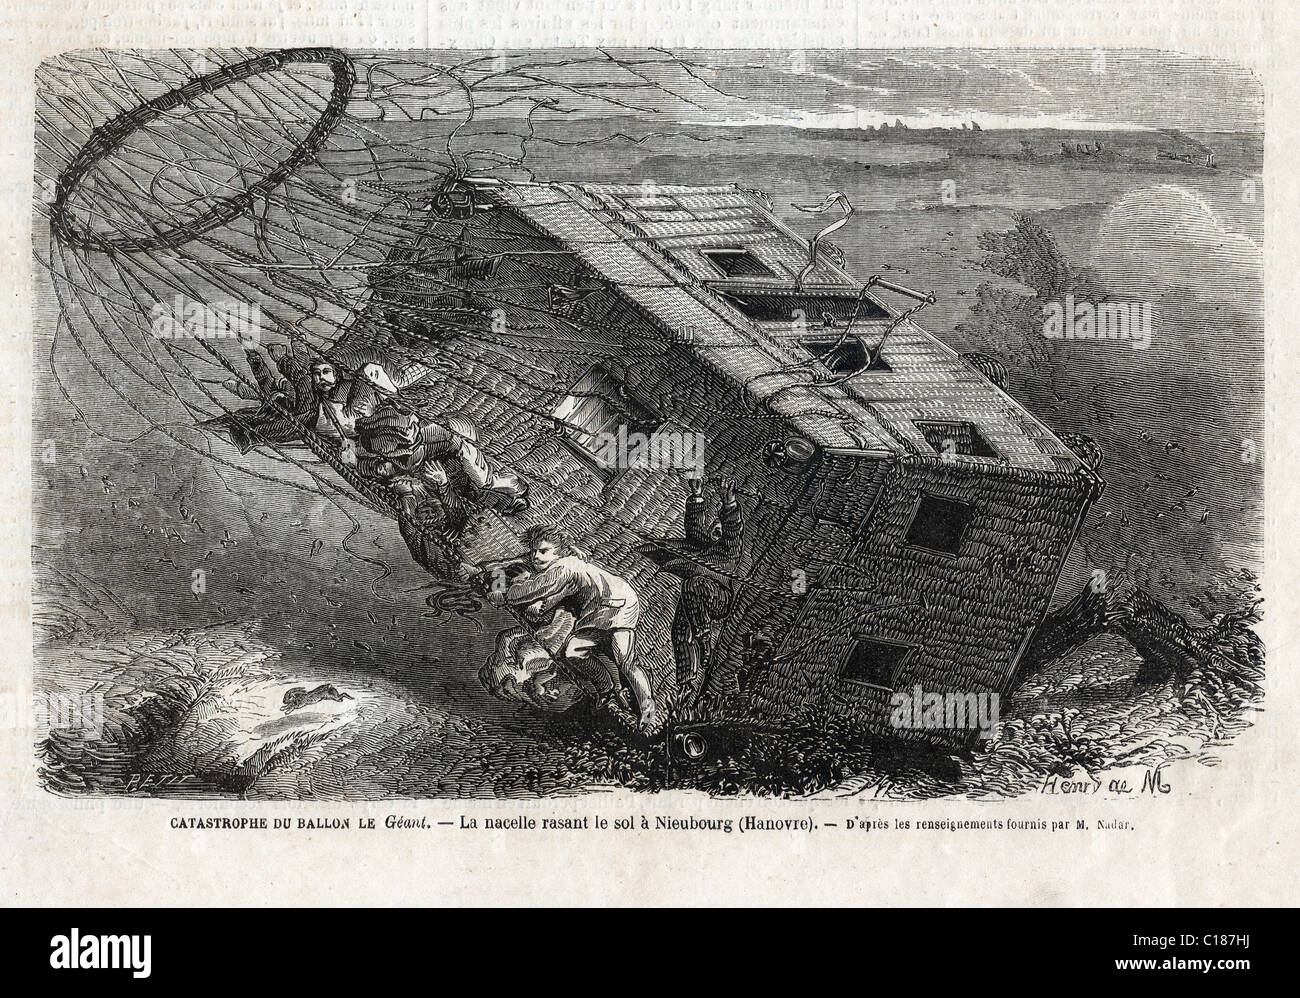 Disaster of the balloon 'Le Géant' at 'Nieubourg' near in 1863. Stock Photo